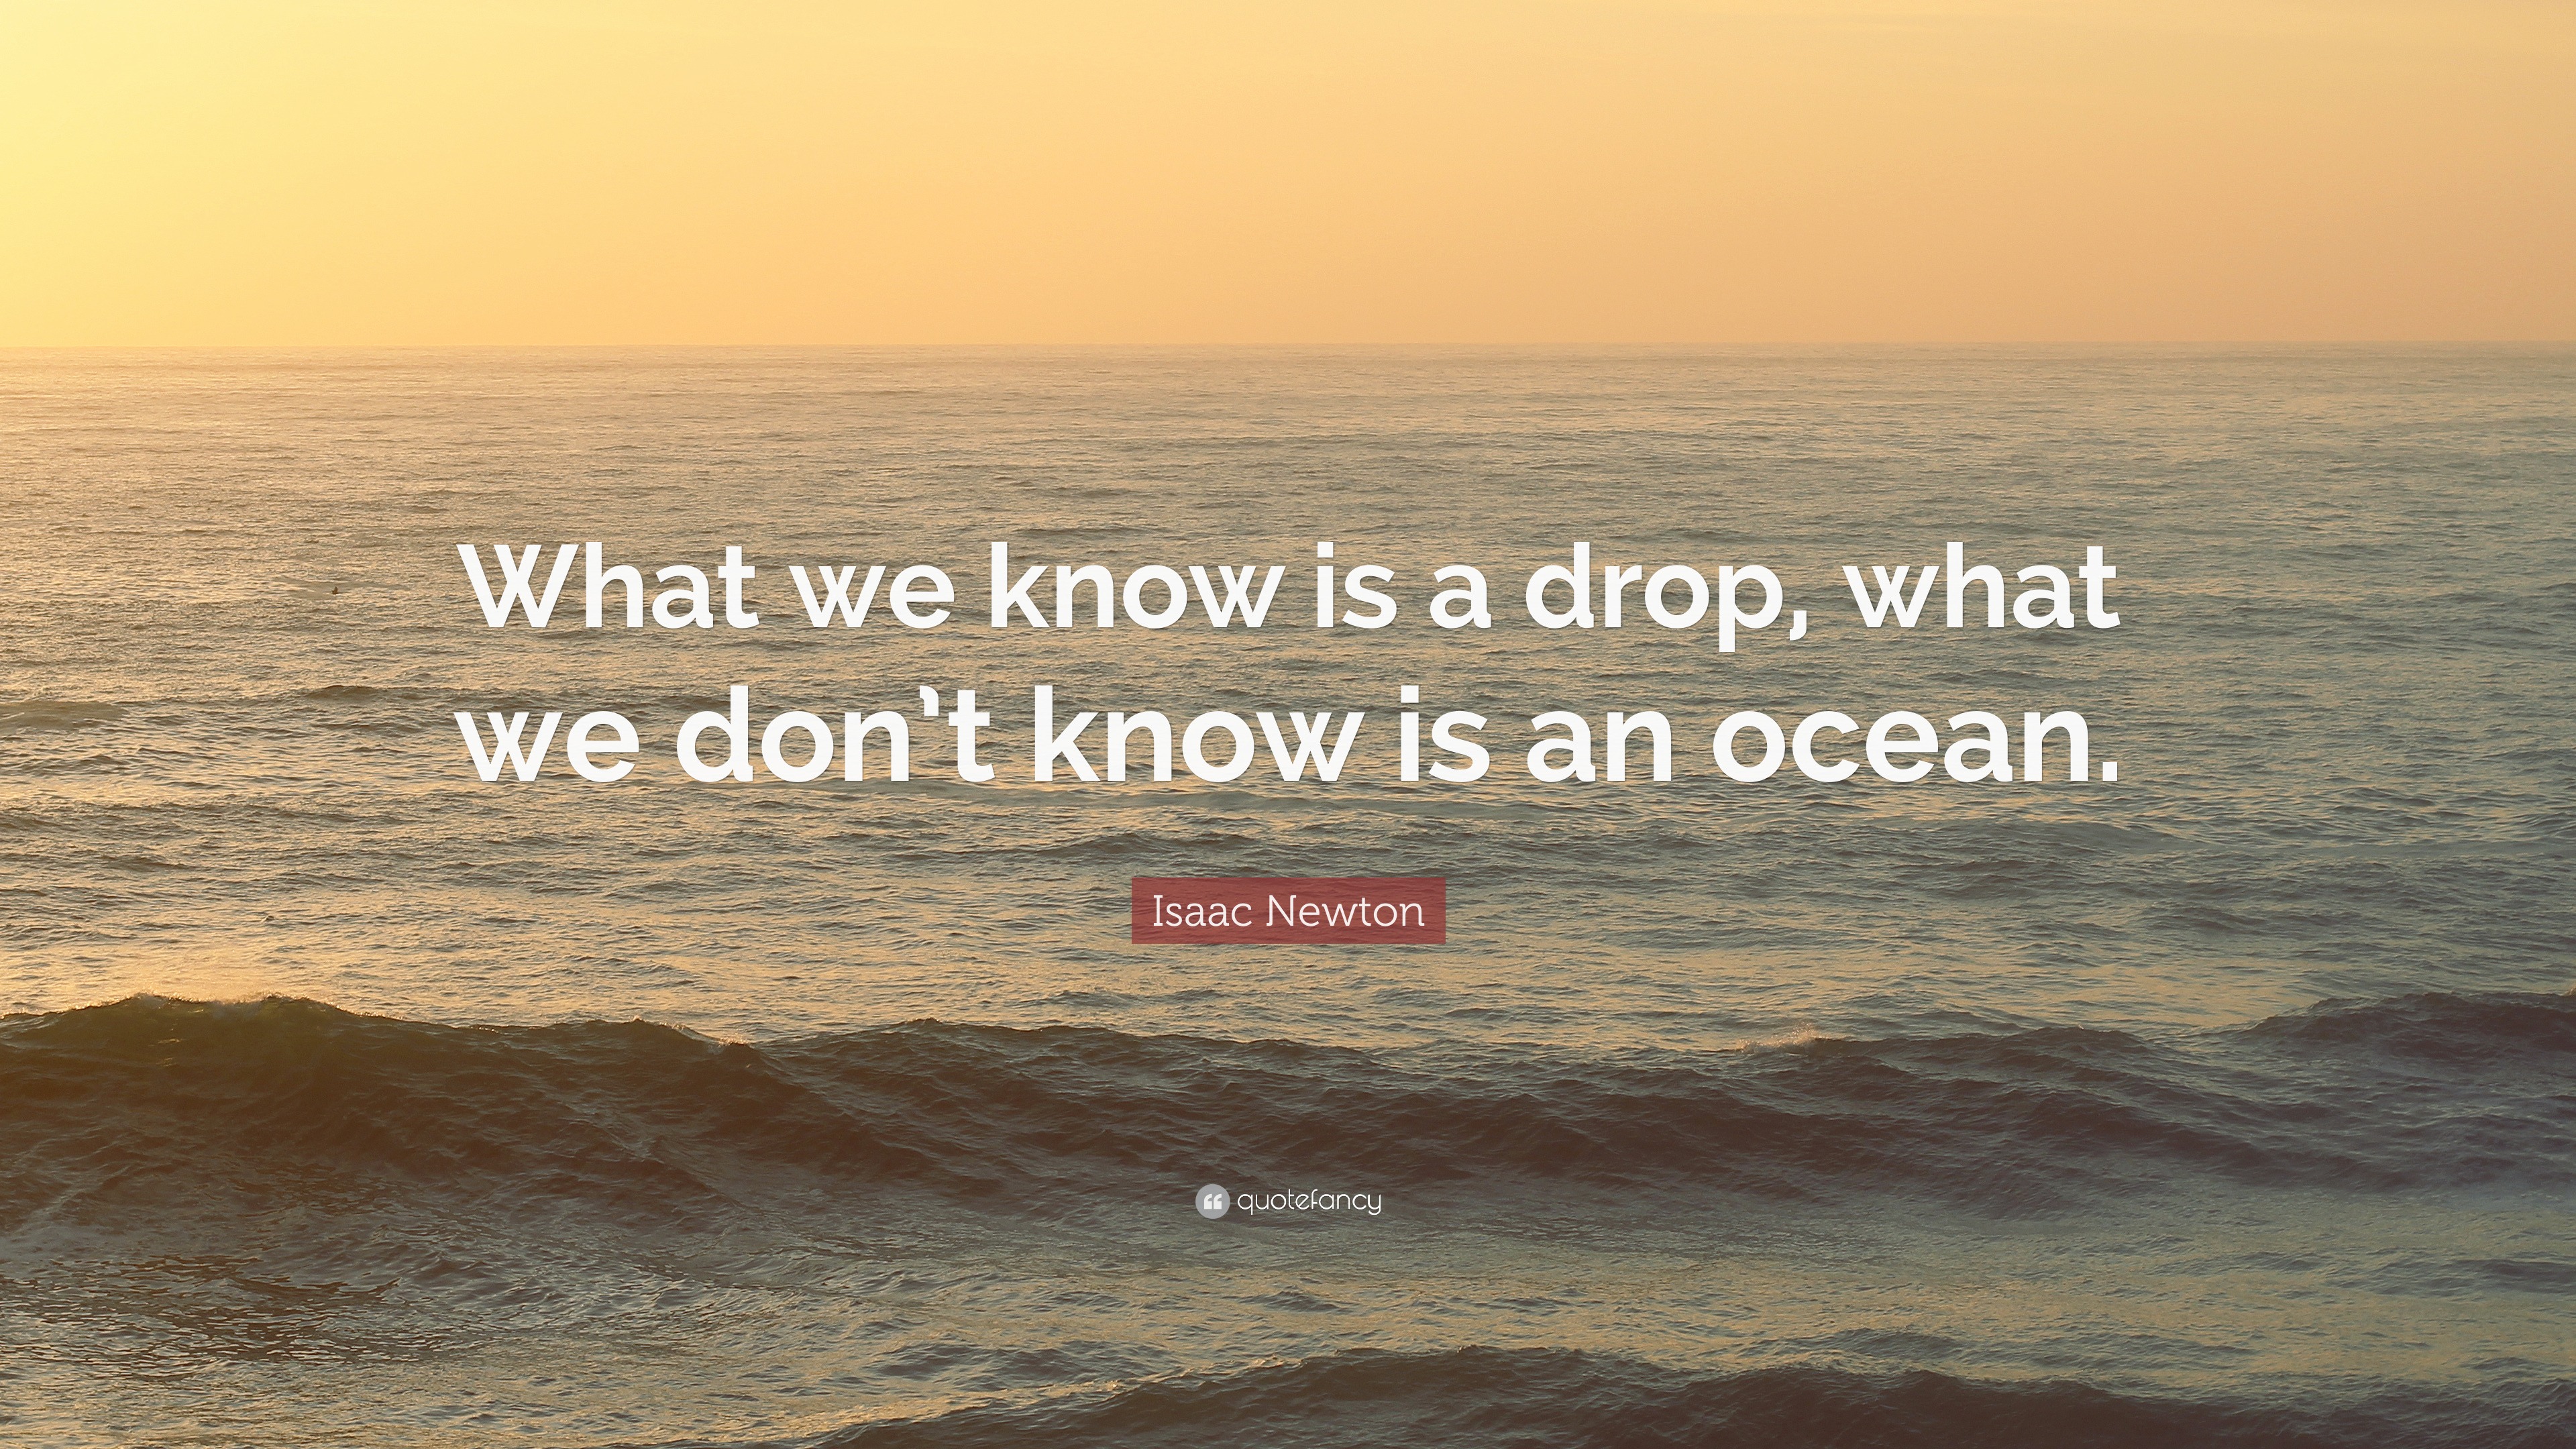 Isaac Newton Quote: "What we know is a drop, what we don't ...